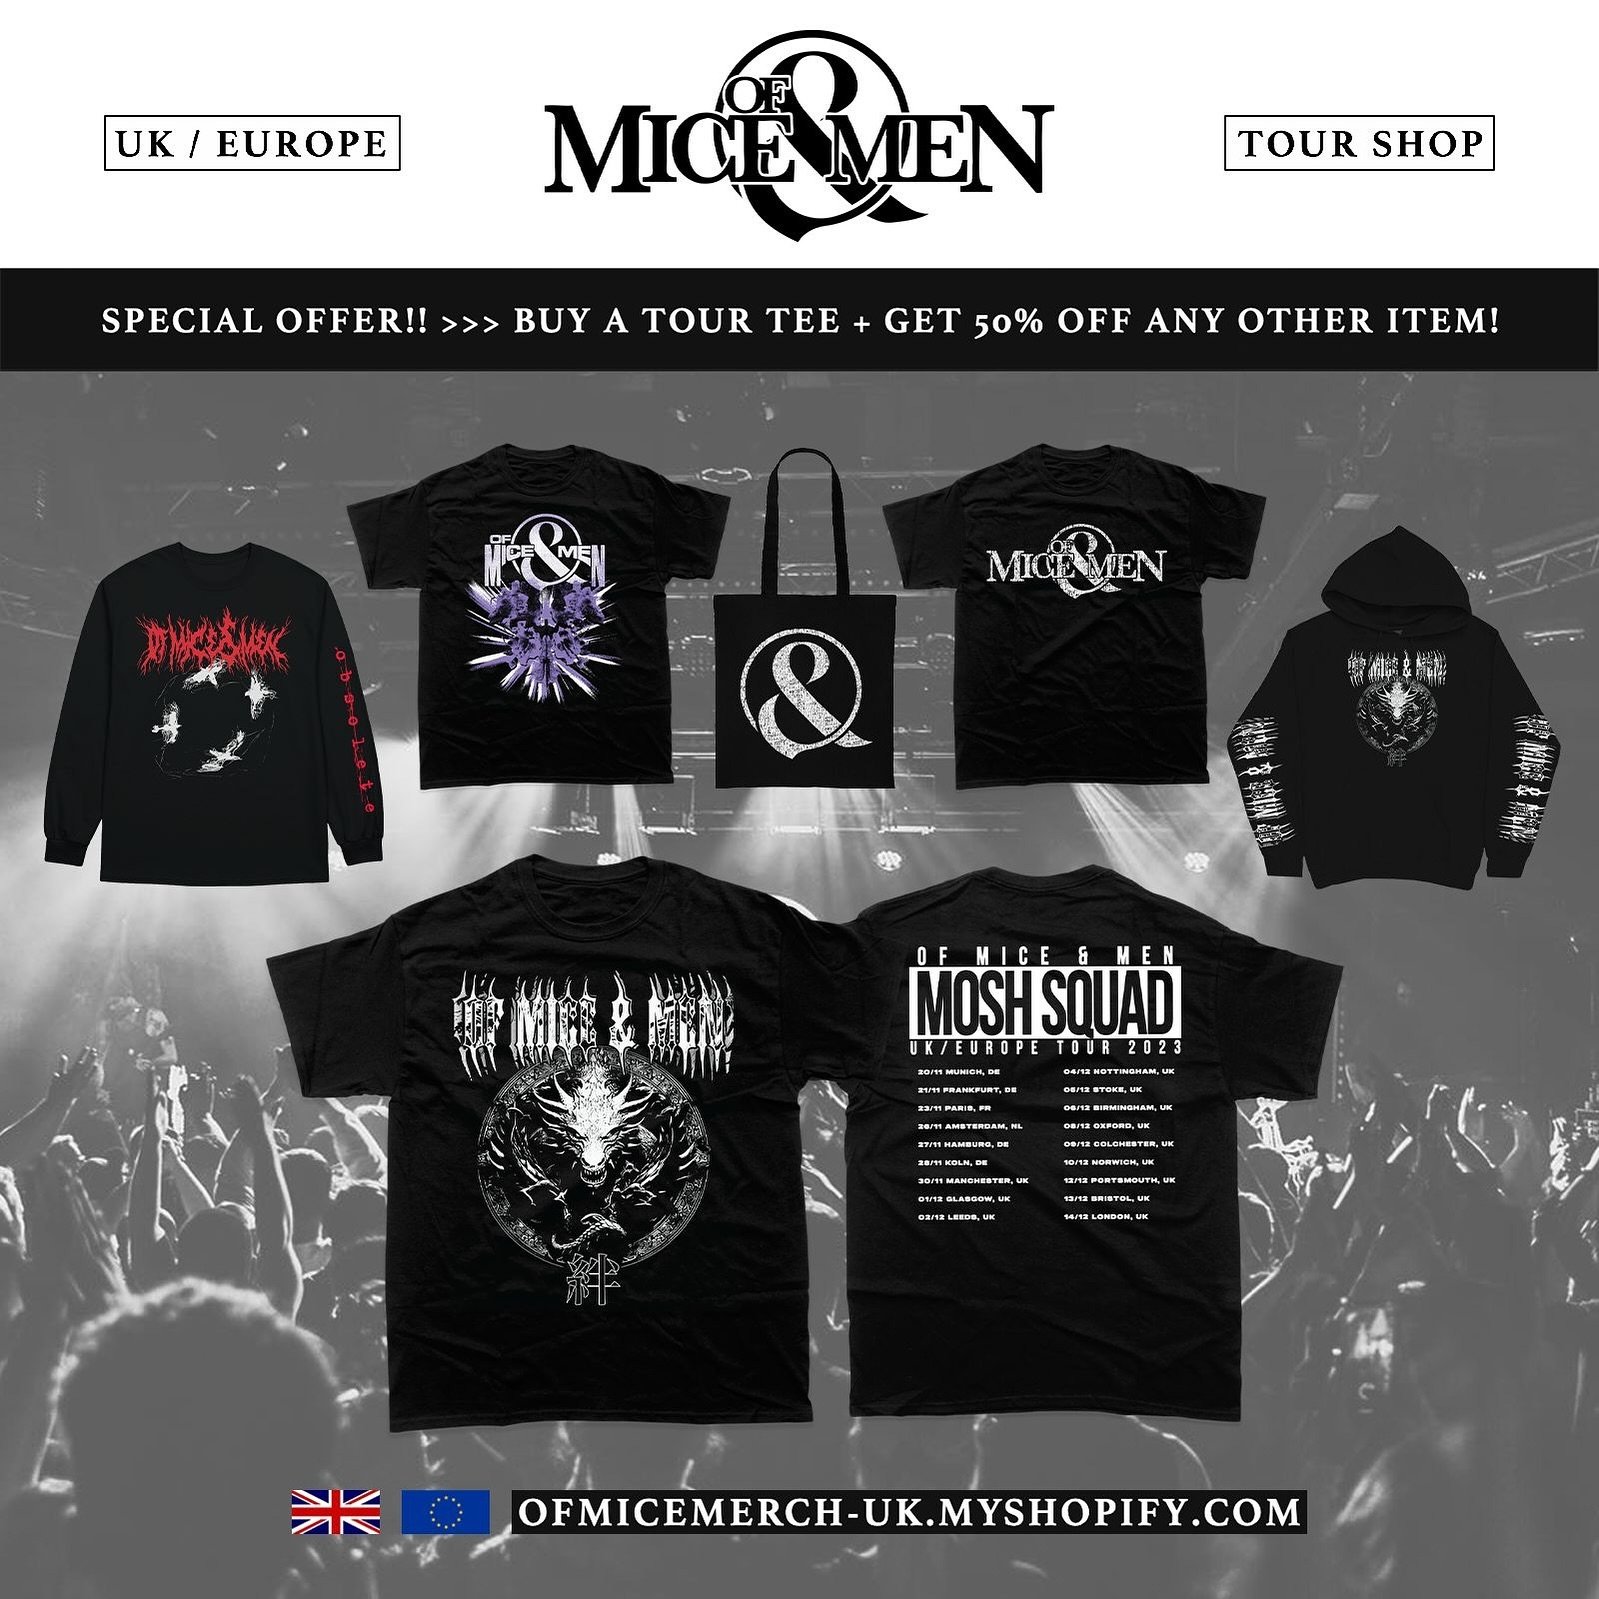 🚨 SALE! 🚨

UK/EU MERCH STORE - BUY A TOUR TEE GET 50% OFF ANY OTHER ITEM!

LINK IN BIO